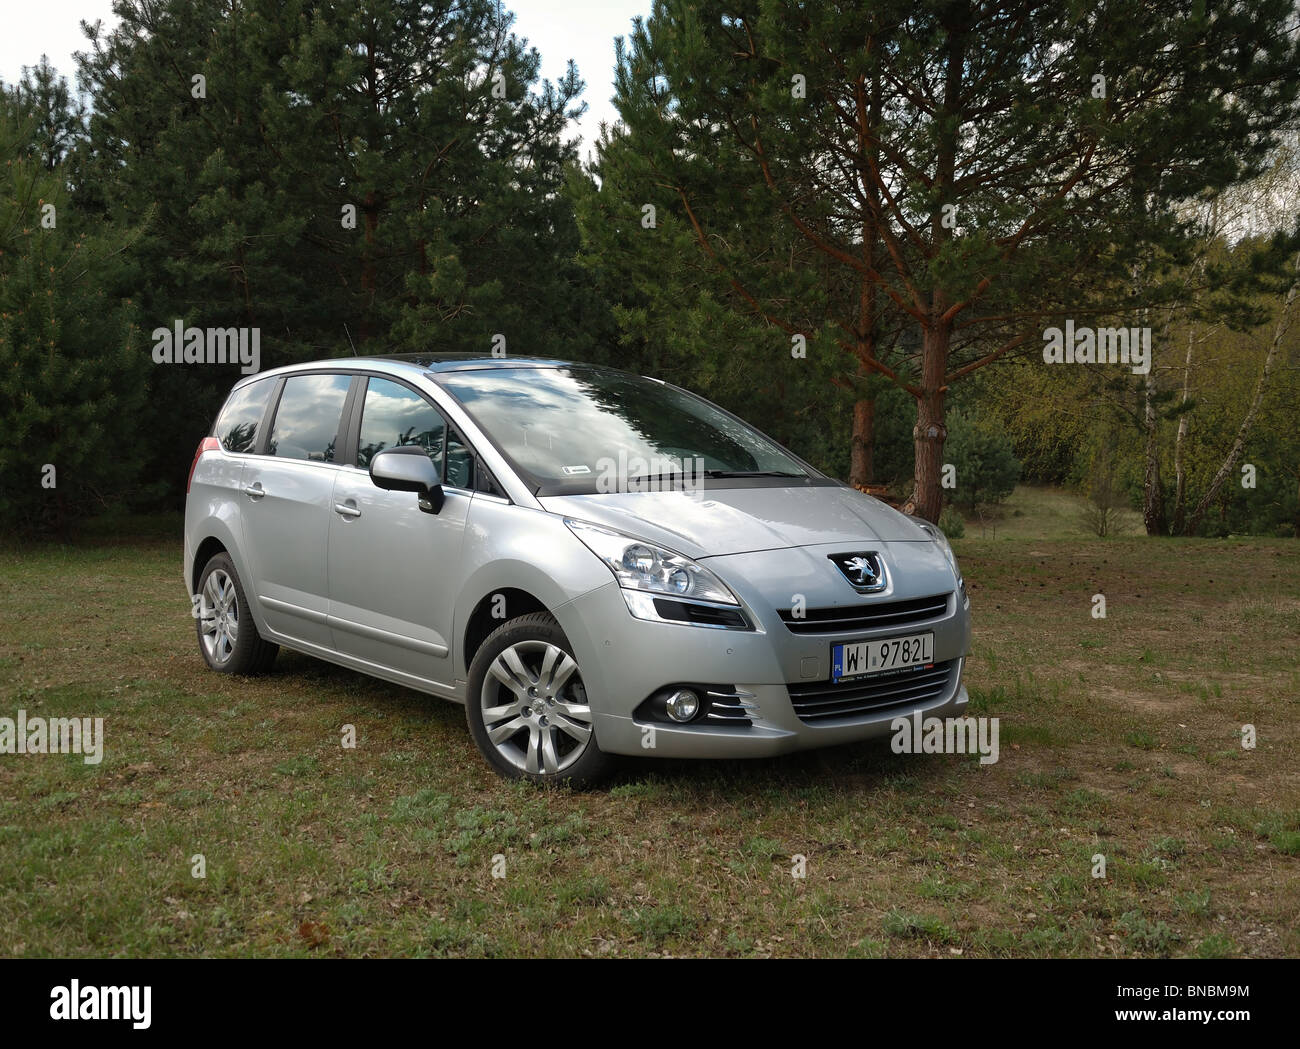 Peugeot 5008 1.6 THP - MY 2010 - silver metallic - five doors (5D) - French popular compact MPV (mini van) - in forest, meadow Stock Photo